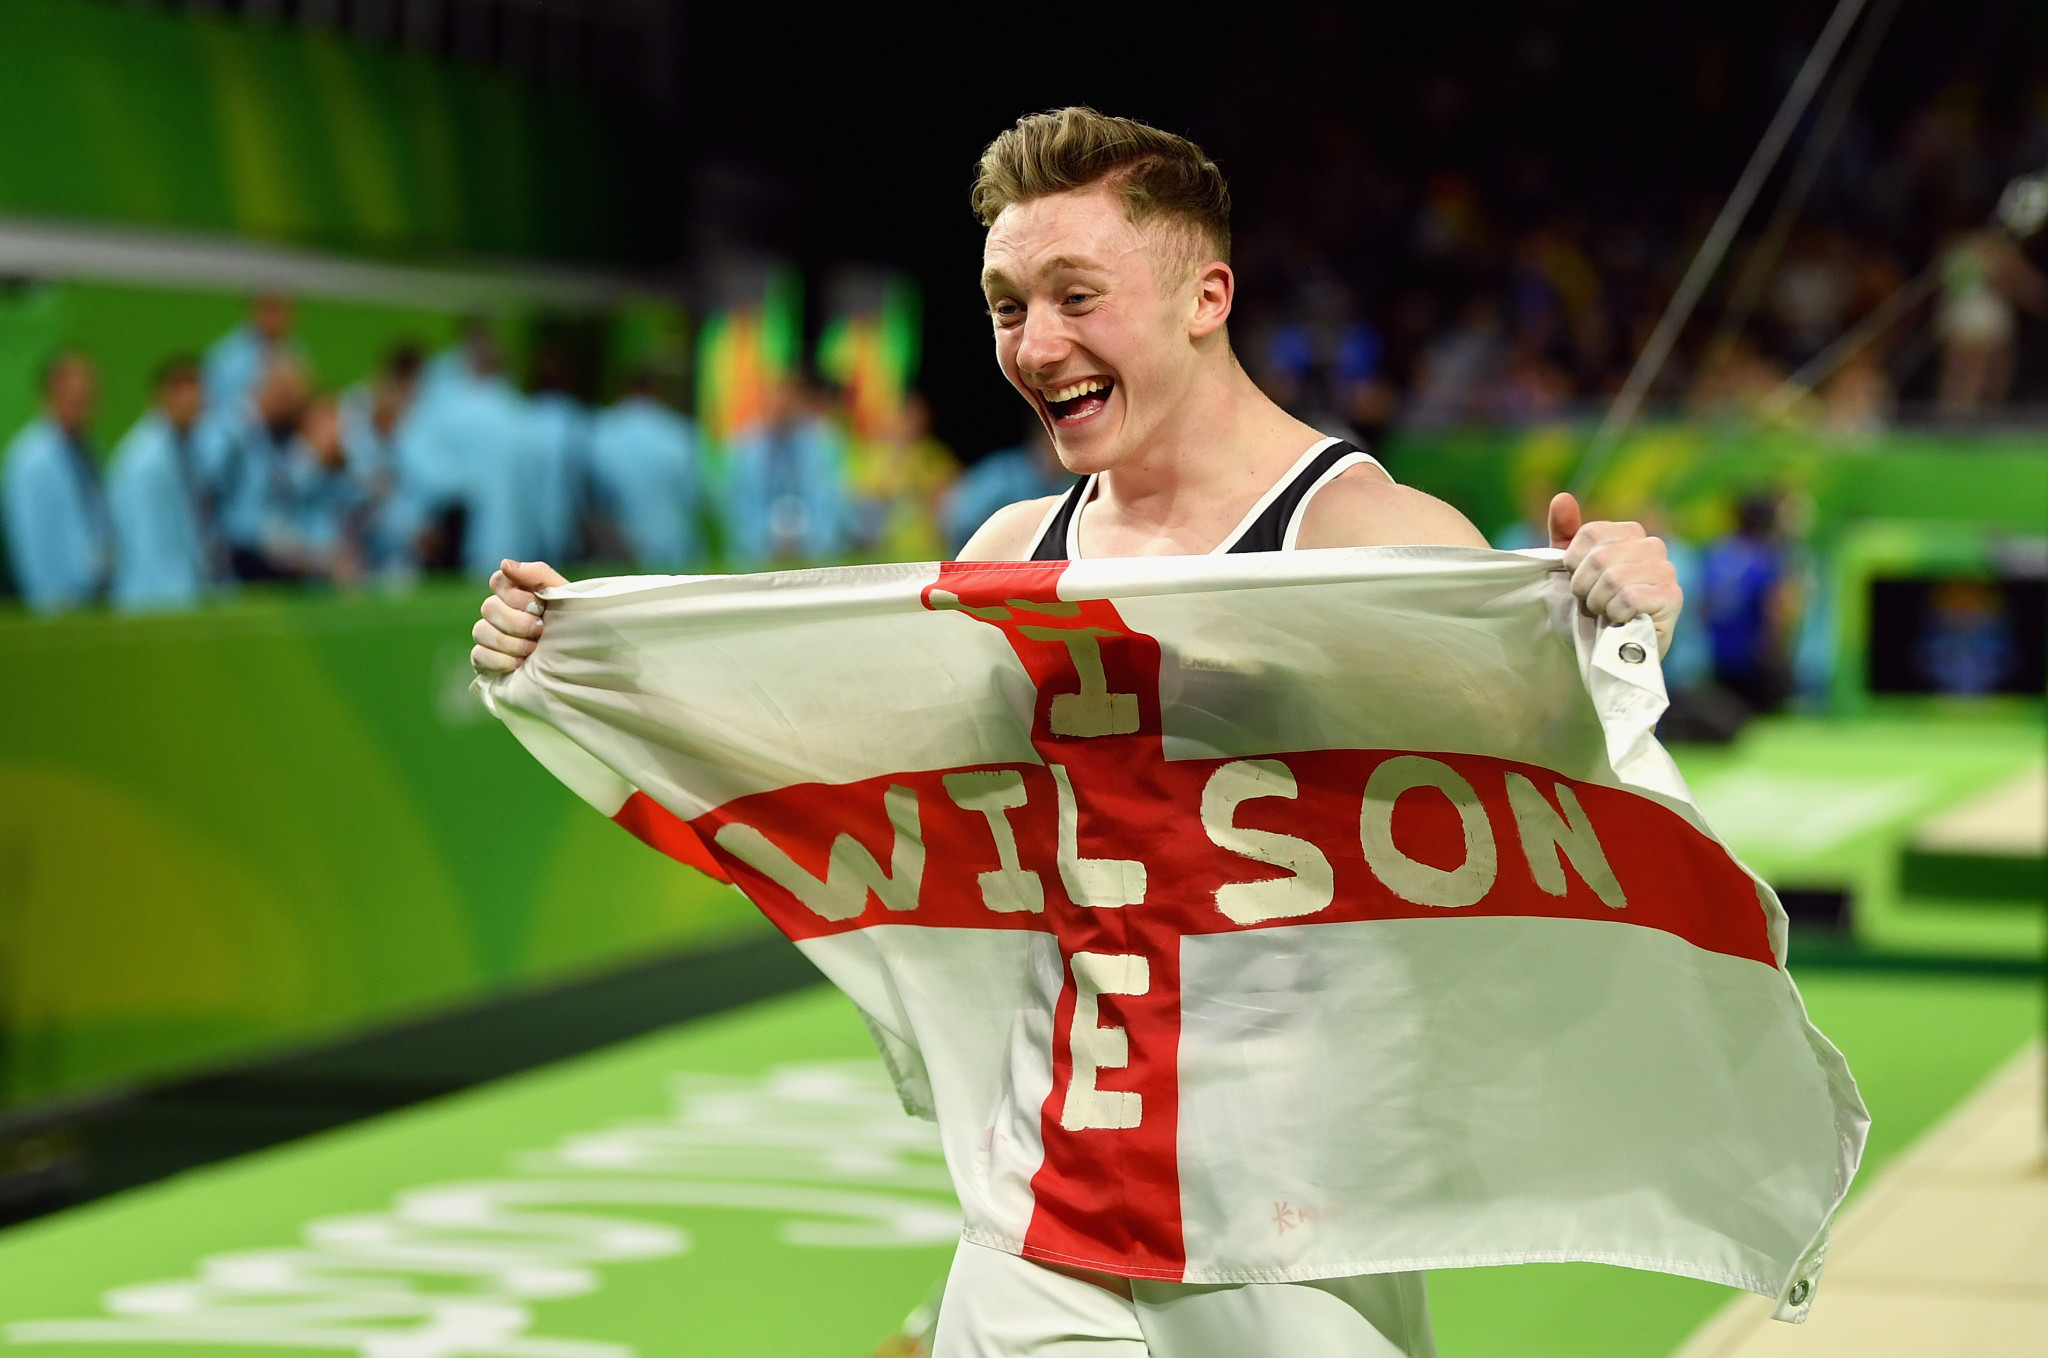 Wilson dazzles on horizontal bar to clinch men's all-around title at Gold Coast 2018